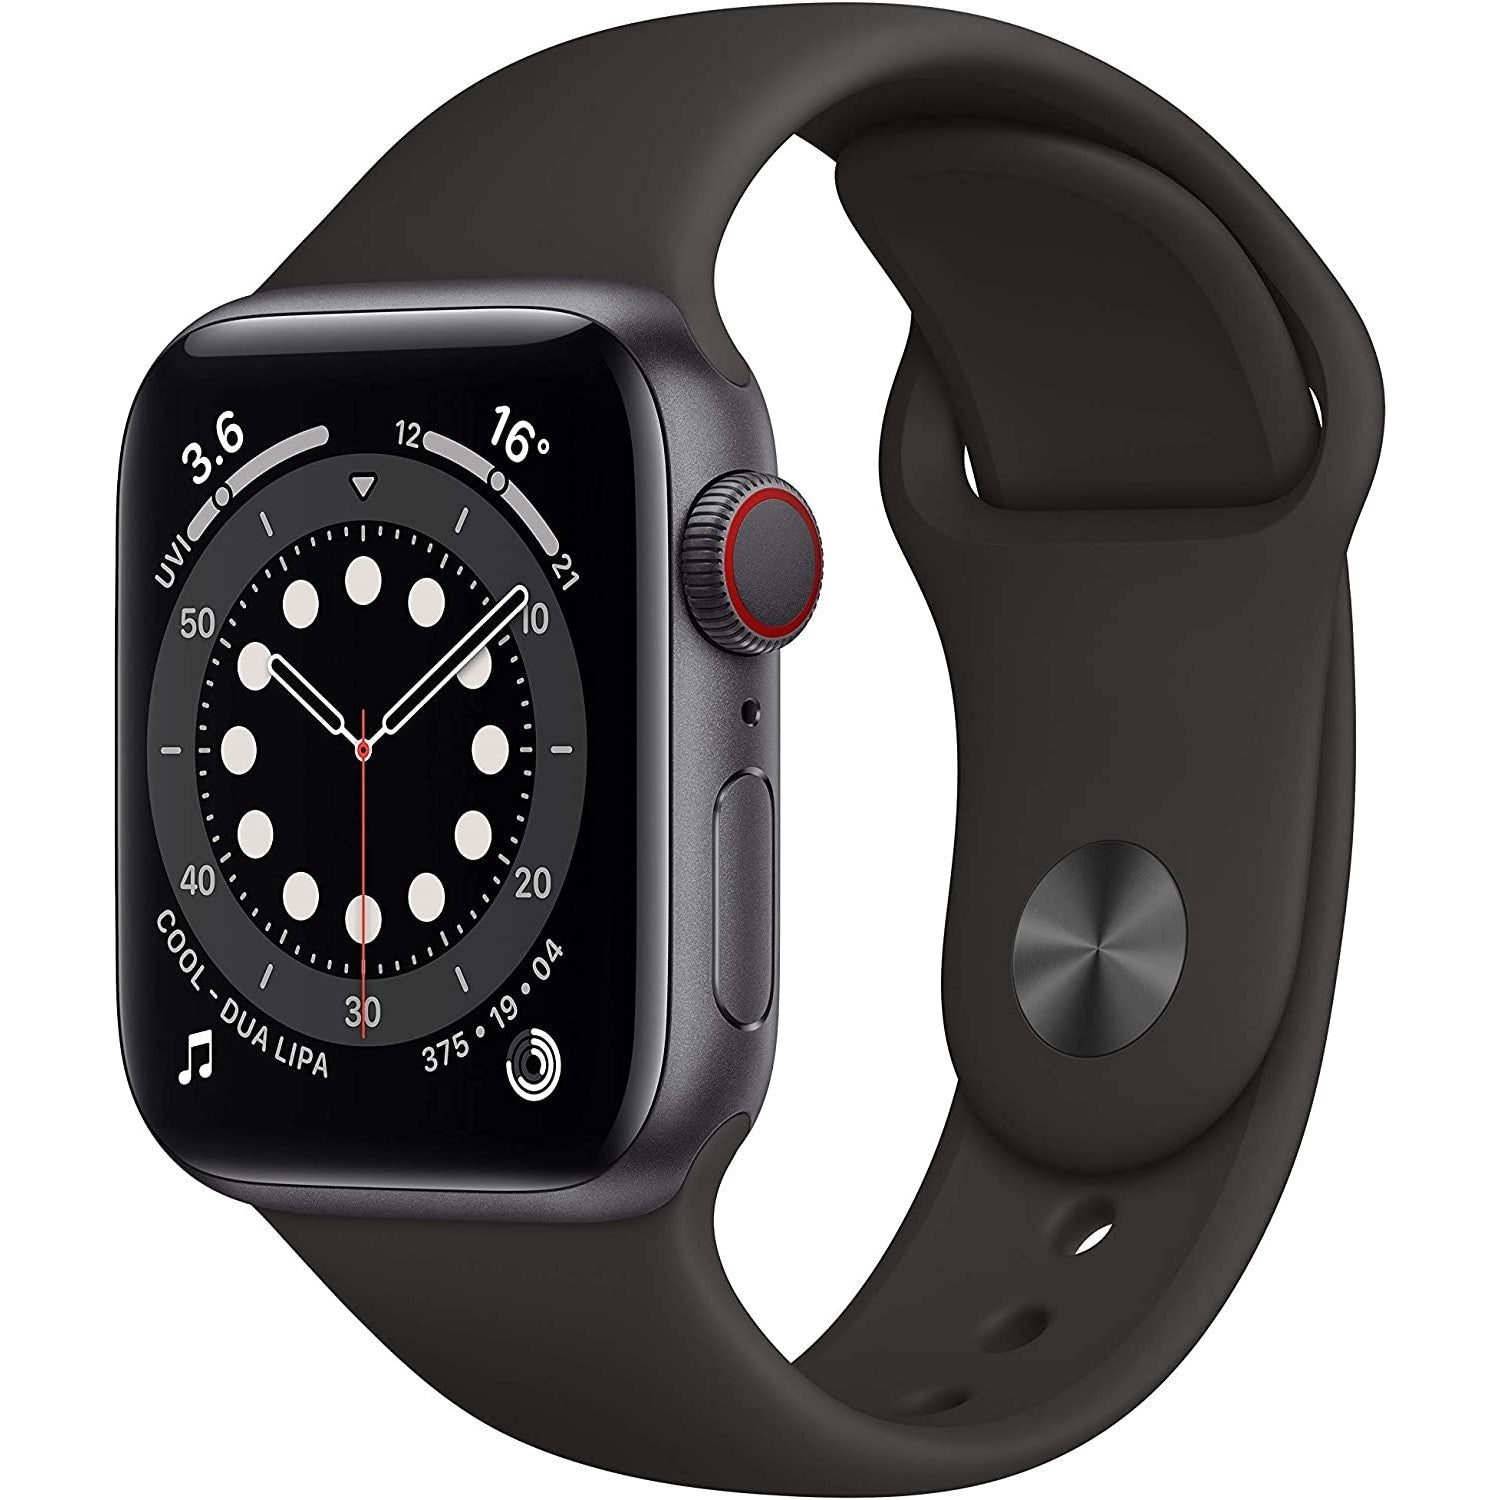 Apple Watch Series 6 GPS + Cellular - 44mm Graphite Stainless Steel Case with Black Sport Band